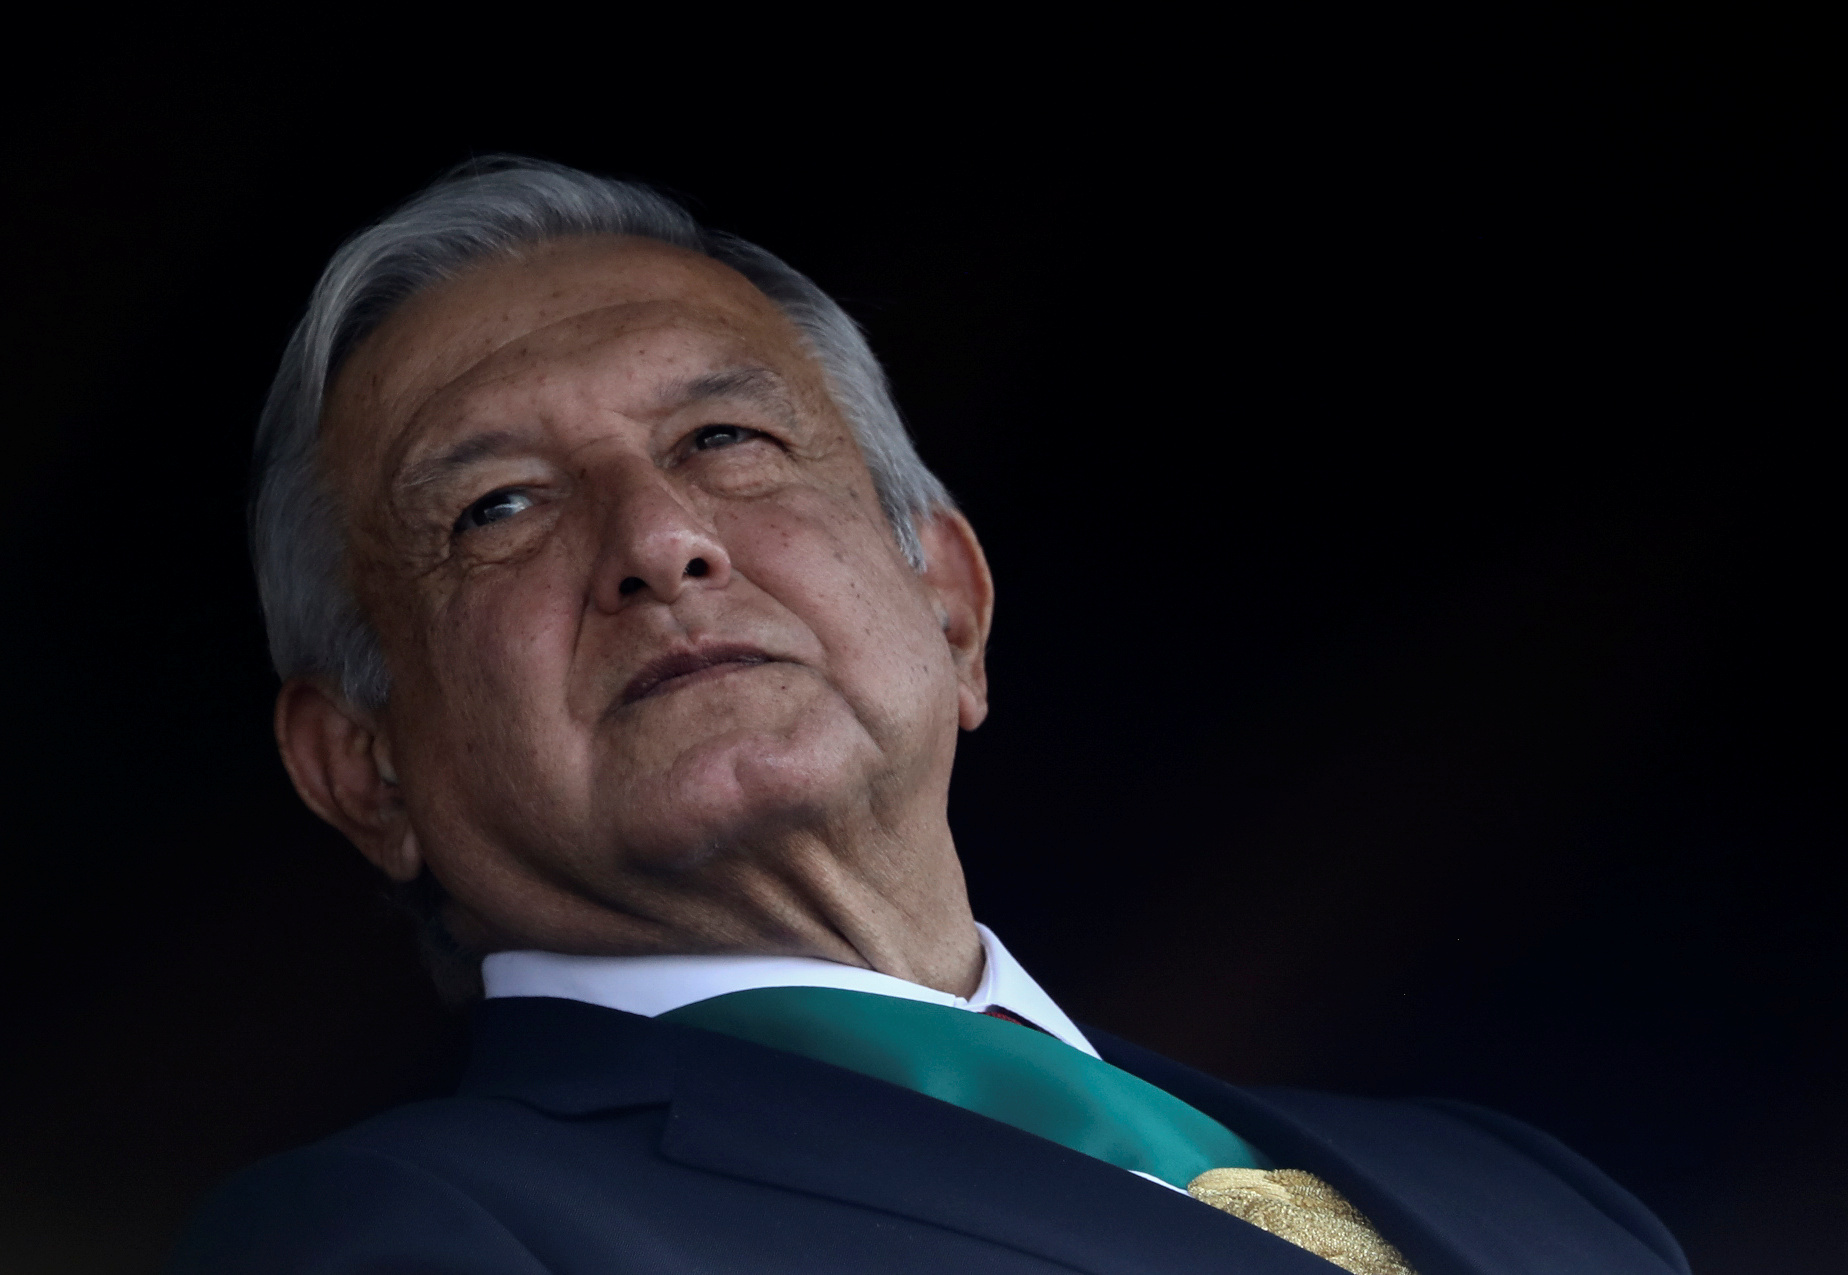 Mexico's President Andres Manuel Lopez Obrador looks on as he attends a military parade in celebration of the 109th anniversary of the Mexican Revolution at Zocalo Square in Mexico City, Mexico November 20, 2019. REUTERS/Edgard Garrido